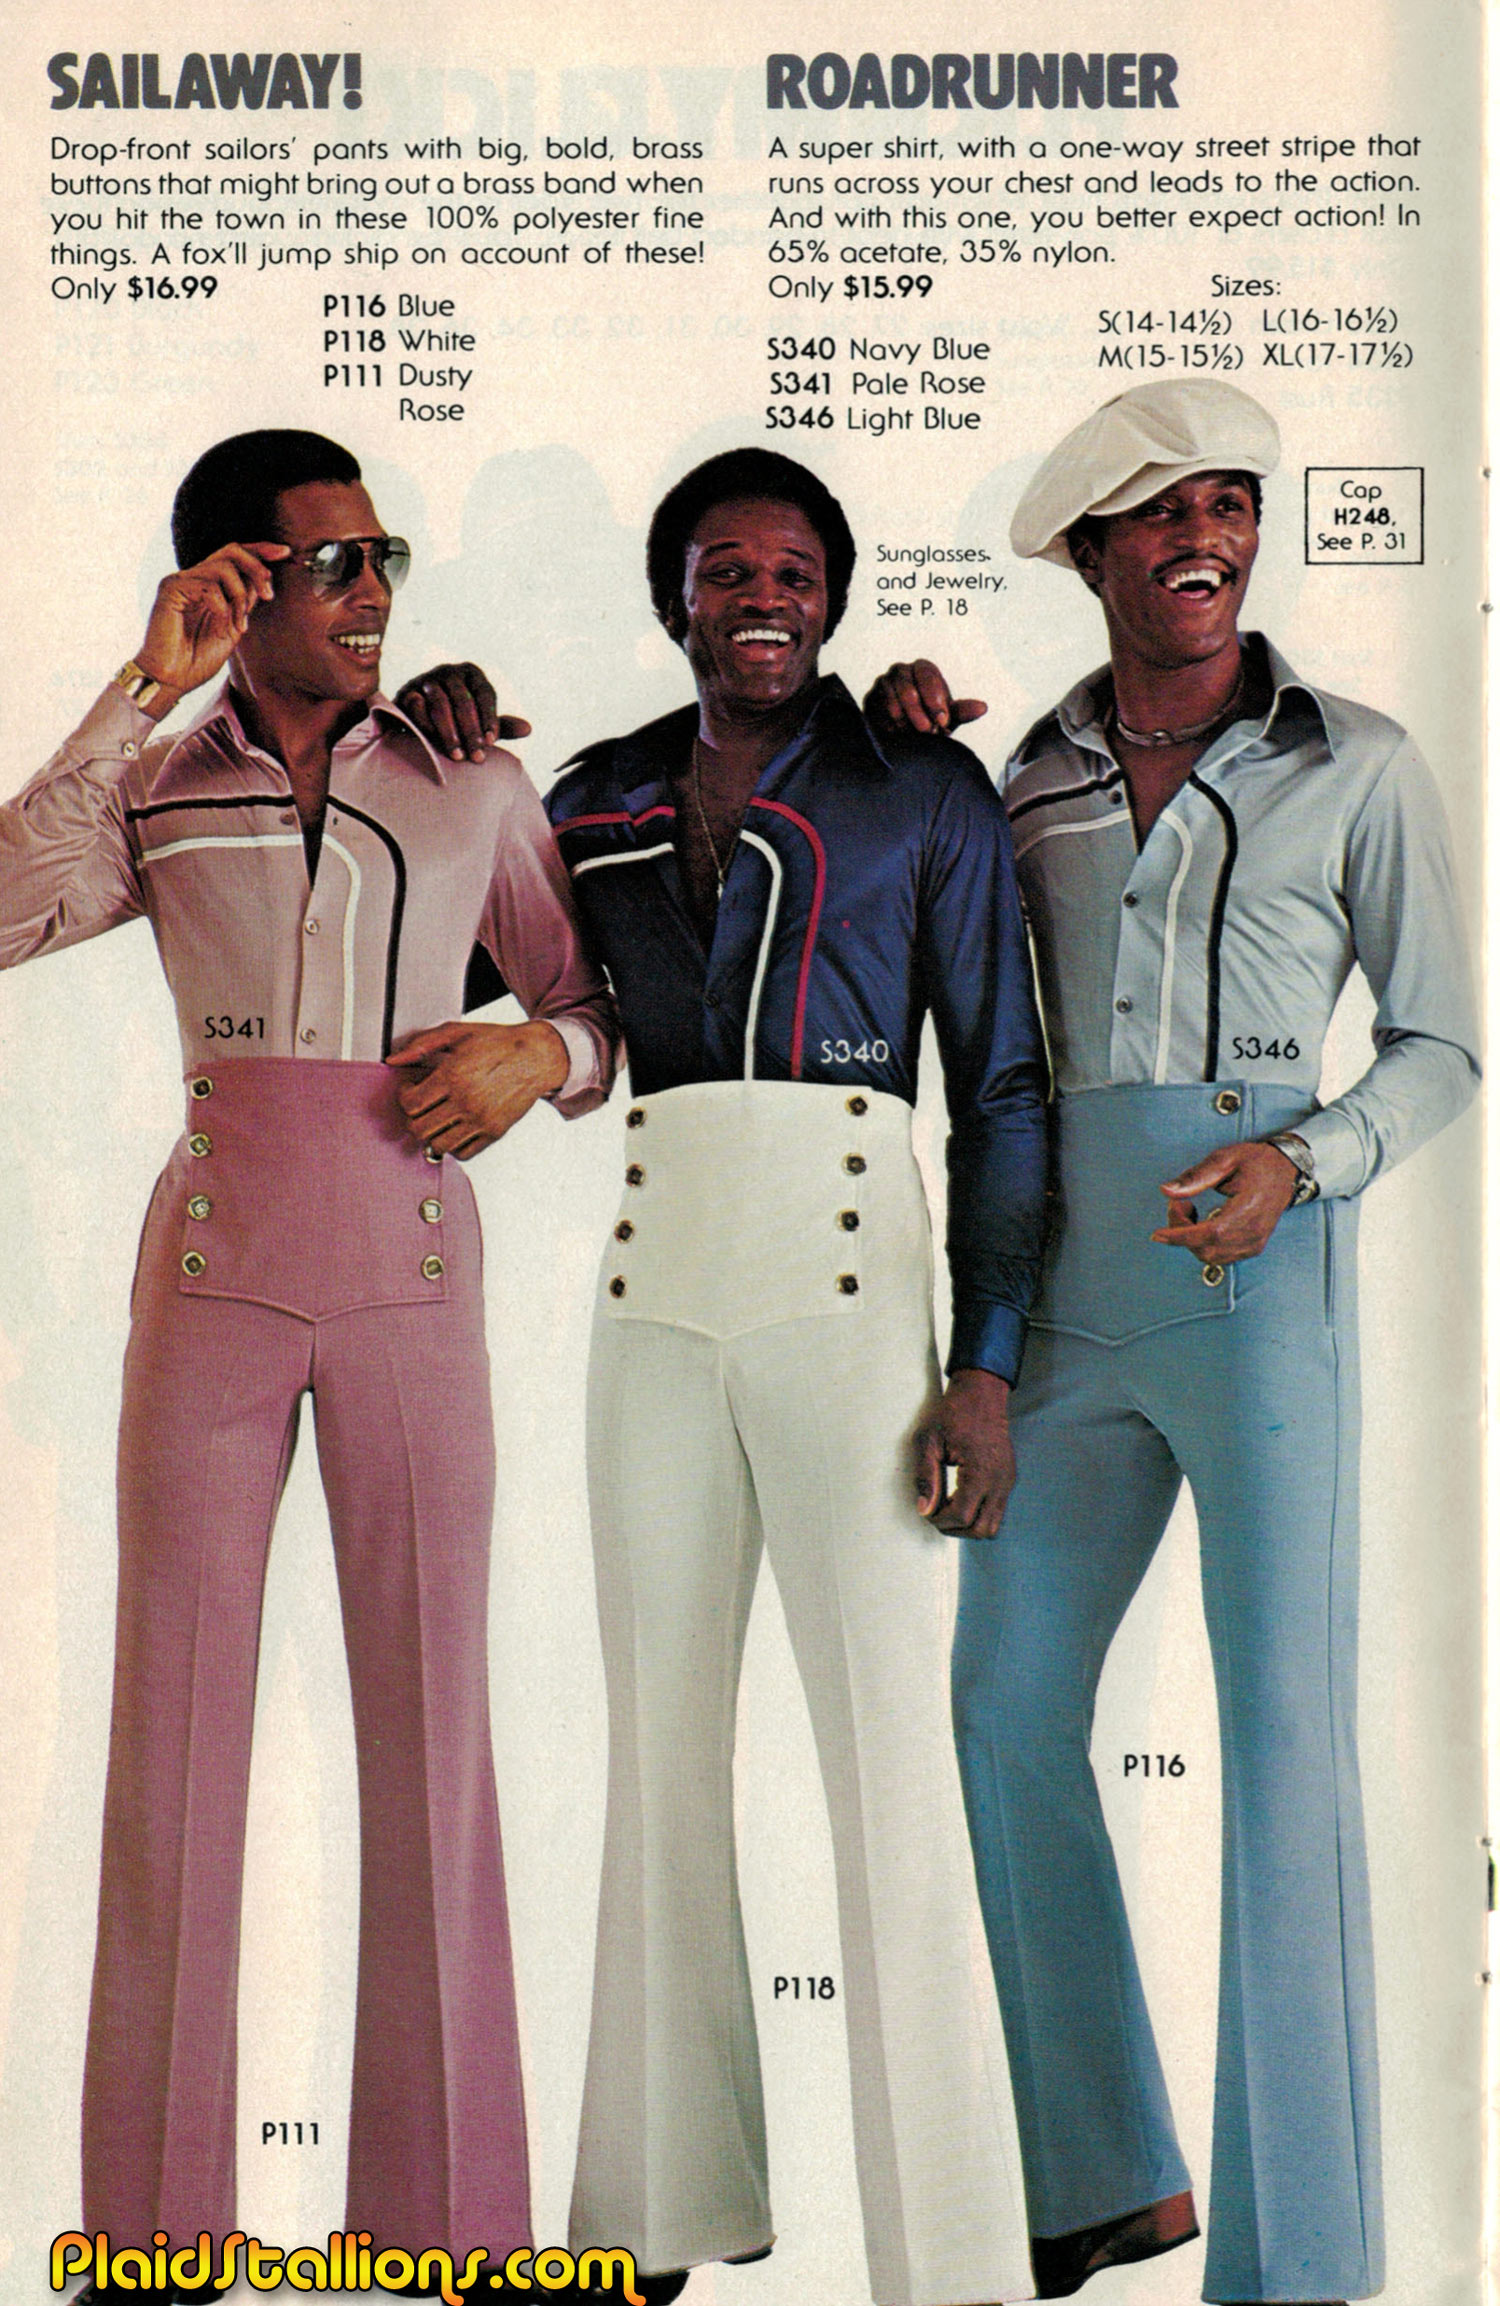 Plaid Stallions : Rambling and Reflections on '70s pop culture: Sailaway!